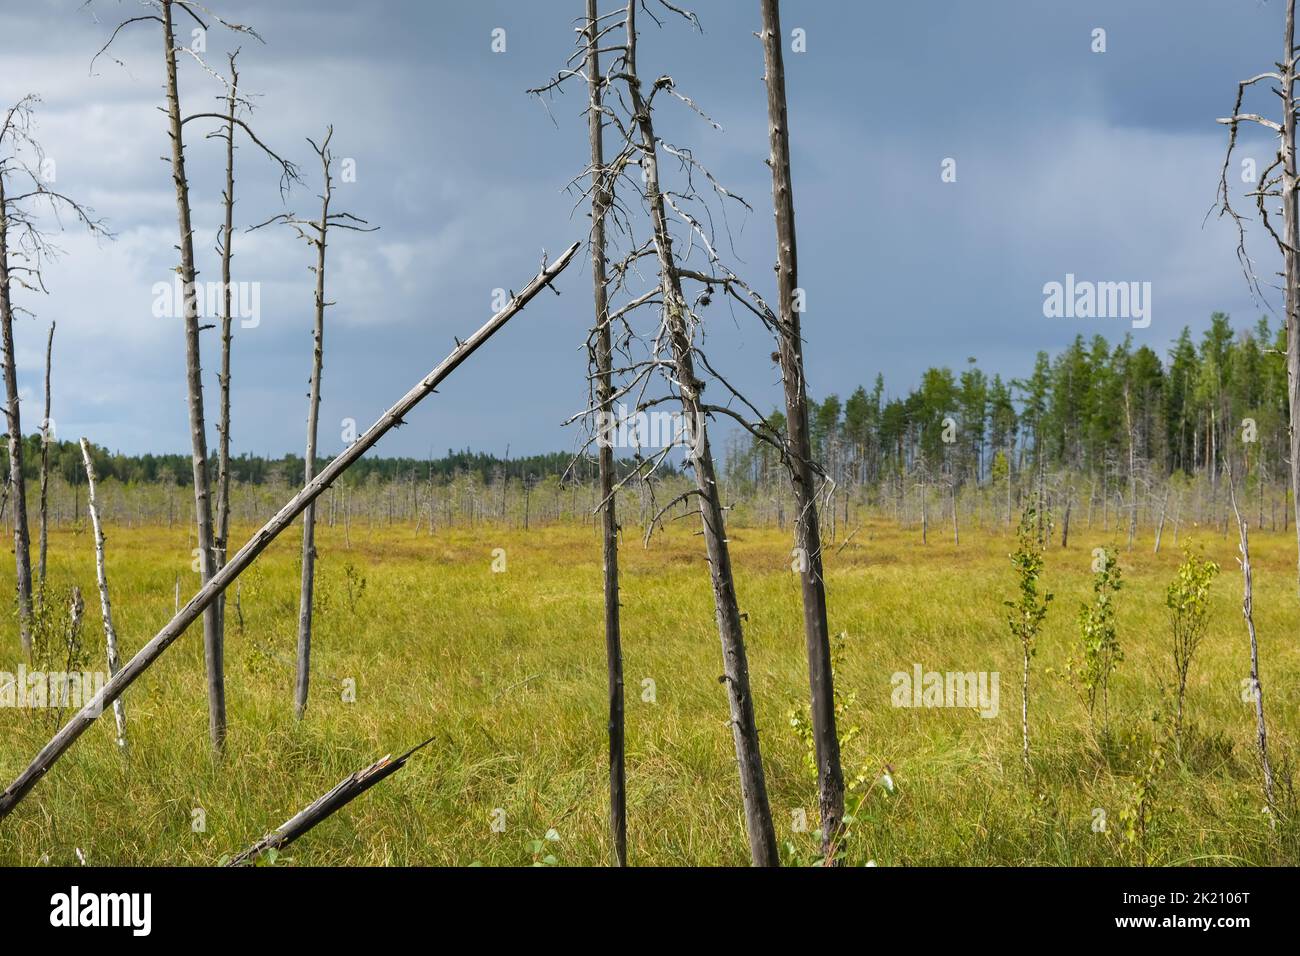 Dry trees in swamps against a blue sky with clouds. Dead trees in the swamp, in the forest. Cloudy sky in a forest with a swamp. Dry tree trunks in the swamp. Stock Photo